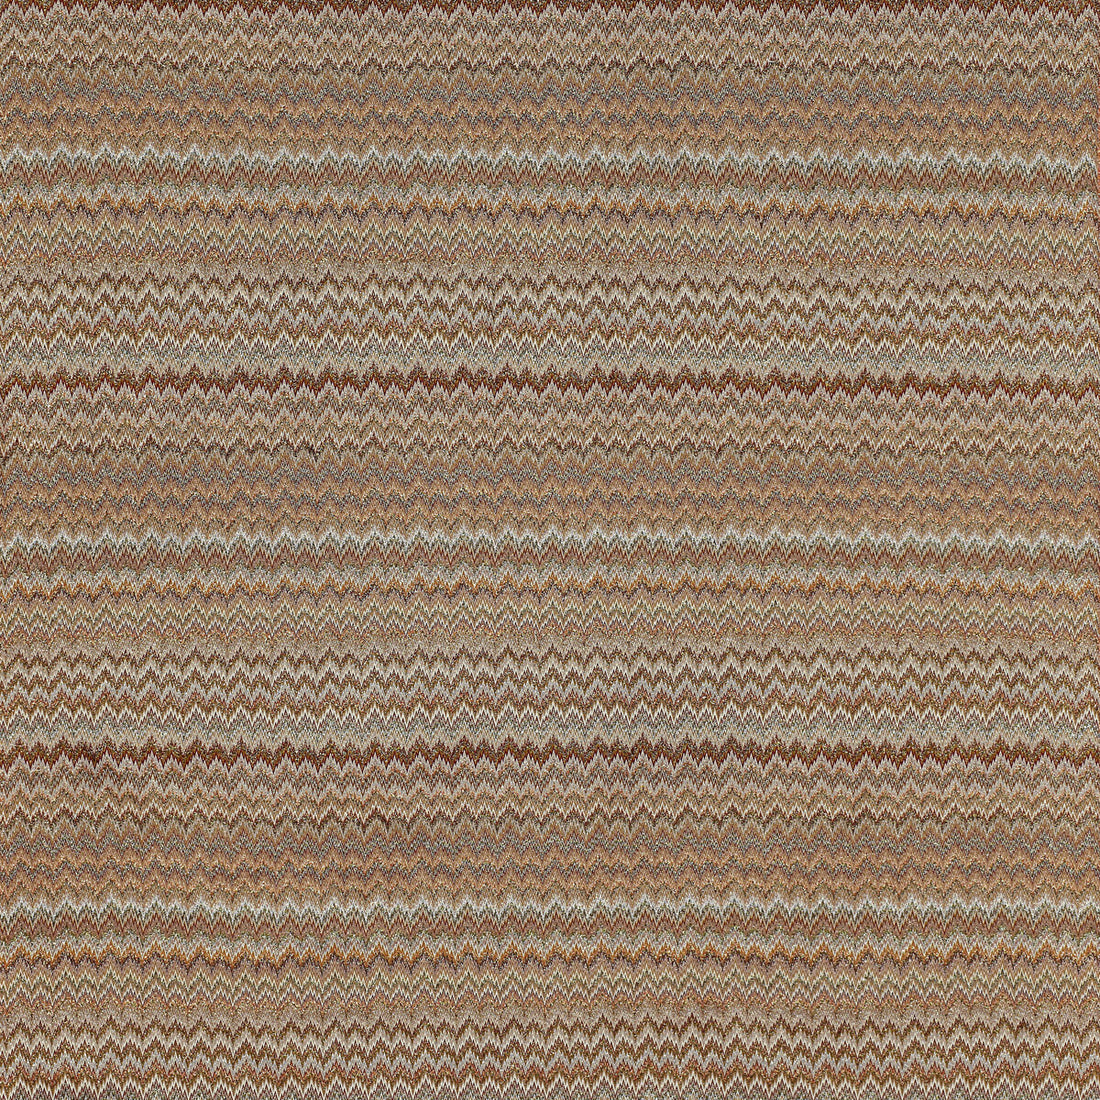 Plaisir fabric in 156 color - pattern 36184.624.0 - by Kravet Couture in the Missoni Home collection